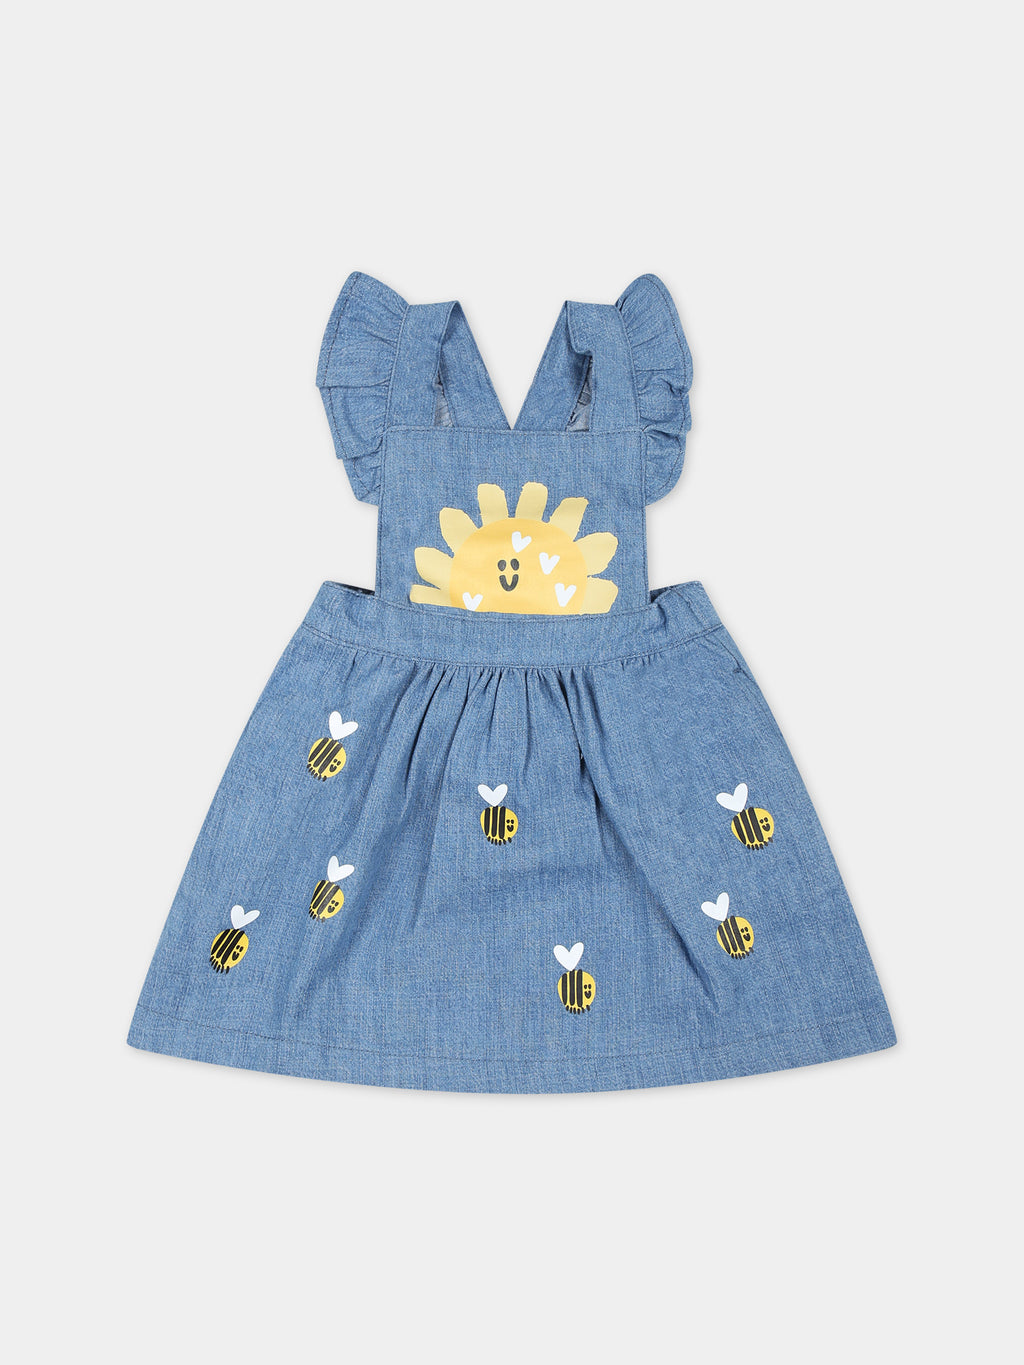 Blue overalls for baby girl with bees